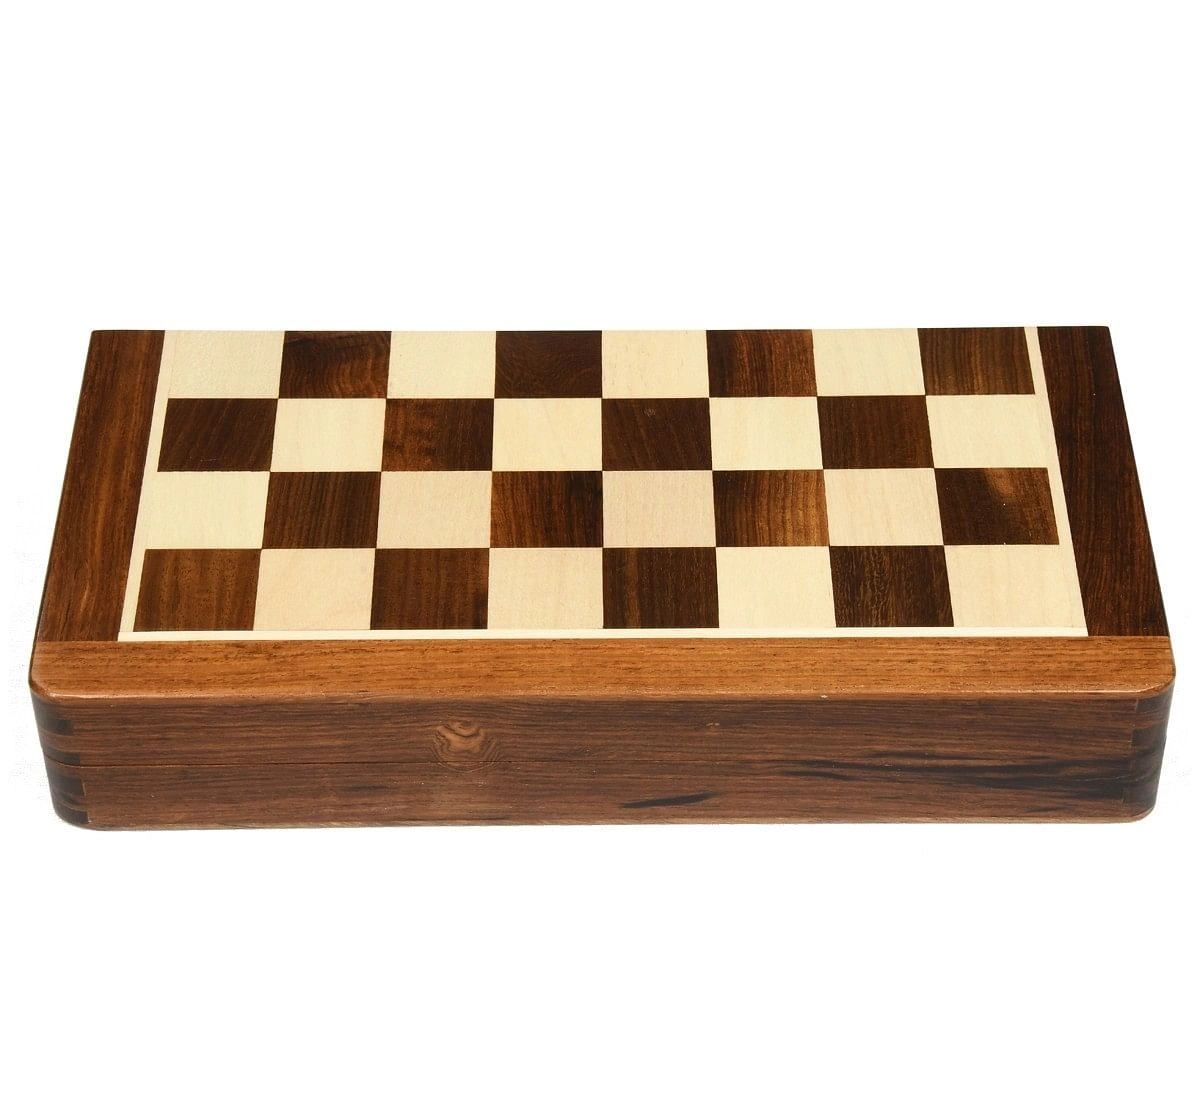 Hamleys 12 inches Wooden Travel Folding Sheesham Magnetic Chess Set for Kids 5Y+, Multicolour